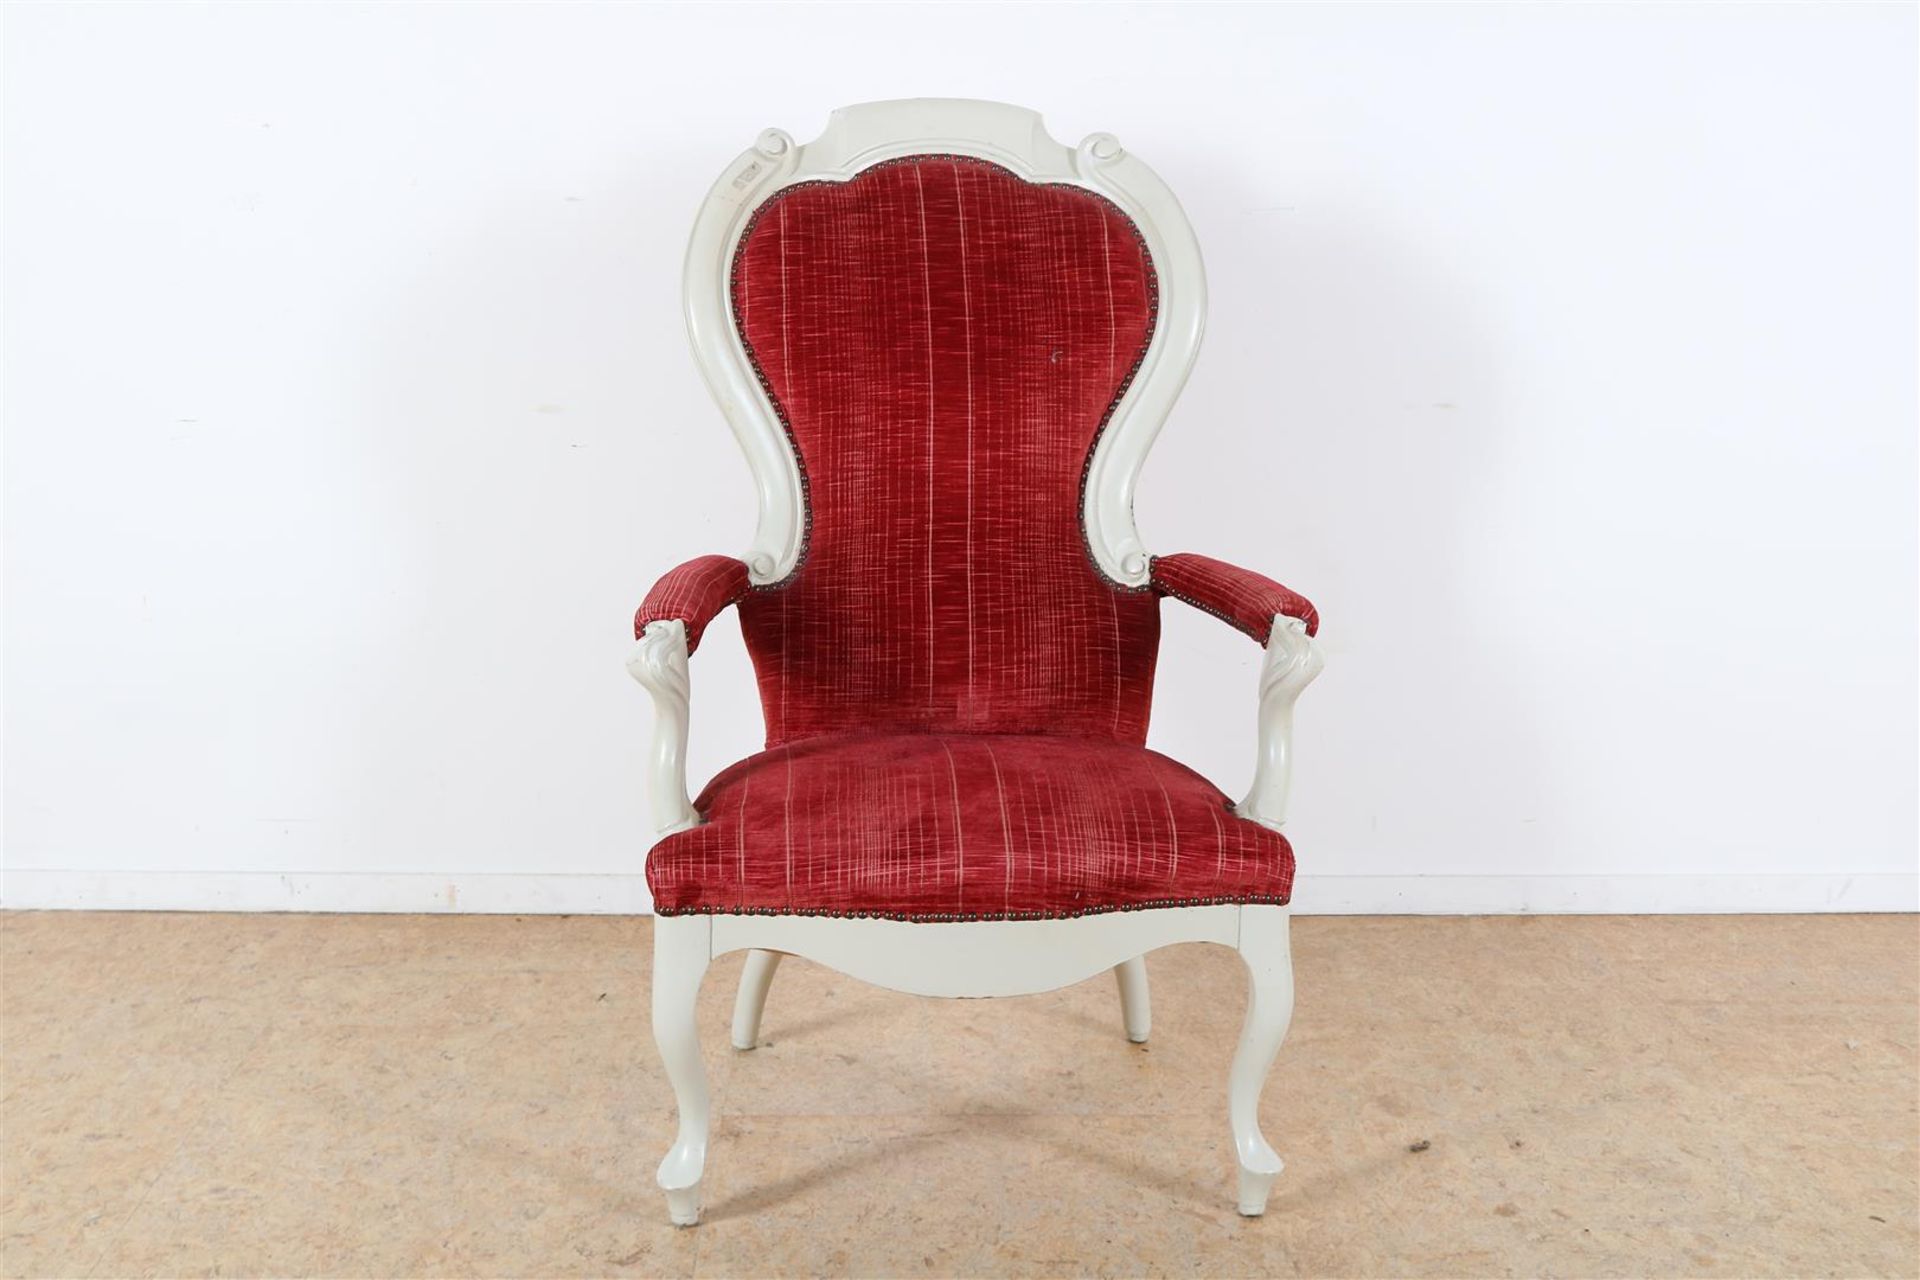 white-painted Biedermeier armchair with red velvet upholstery, 19th century.